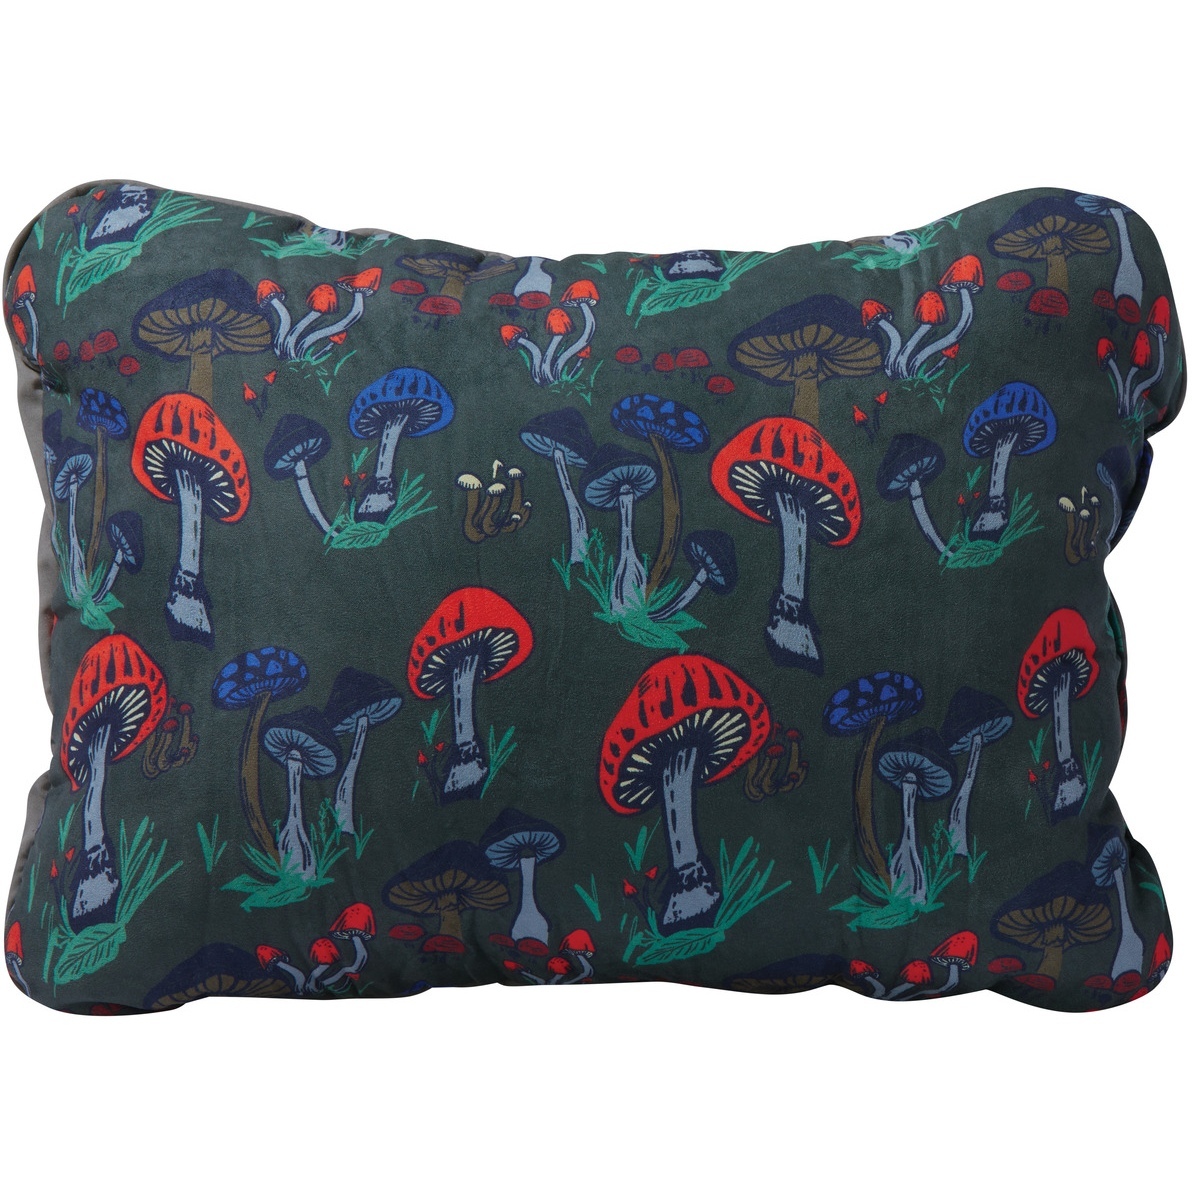 Picture of Therm-a-Rest Compressible PillowCinch S - Fun Guy Print